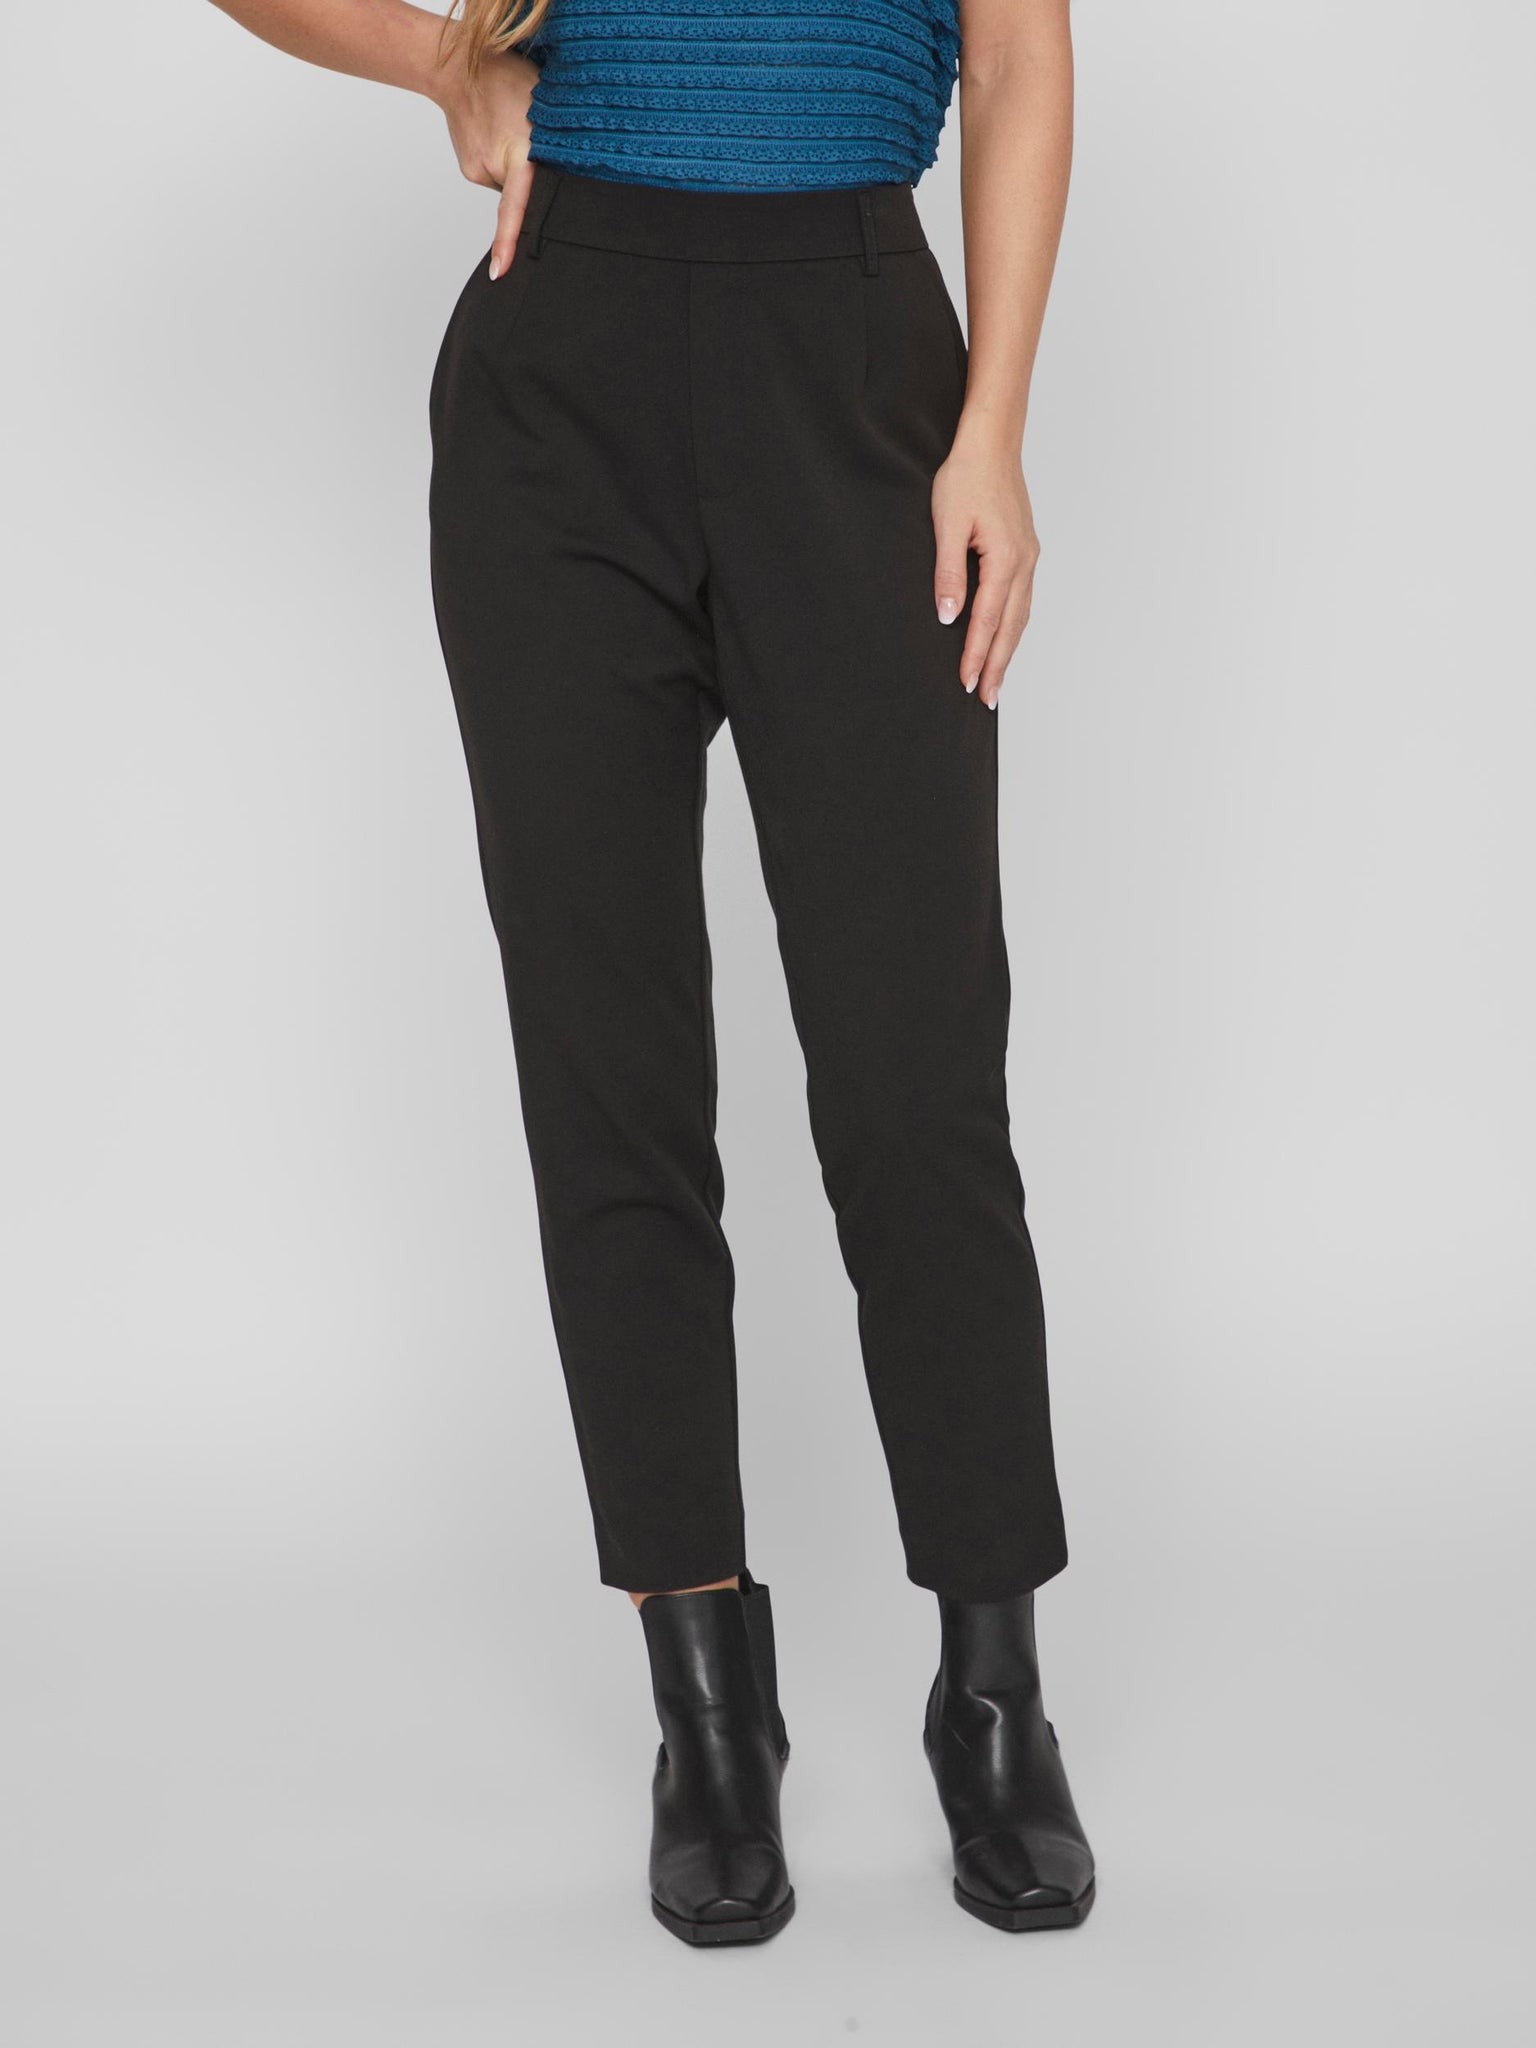 Vila High Waisted Slim Fit Tailored Trousers in black